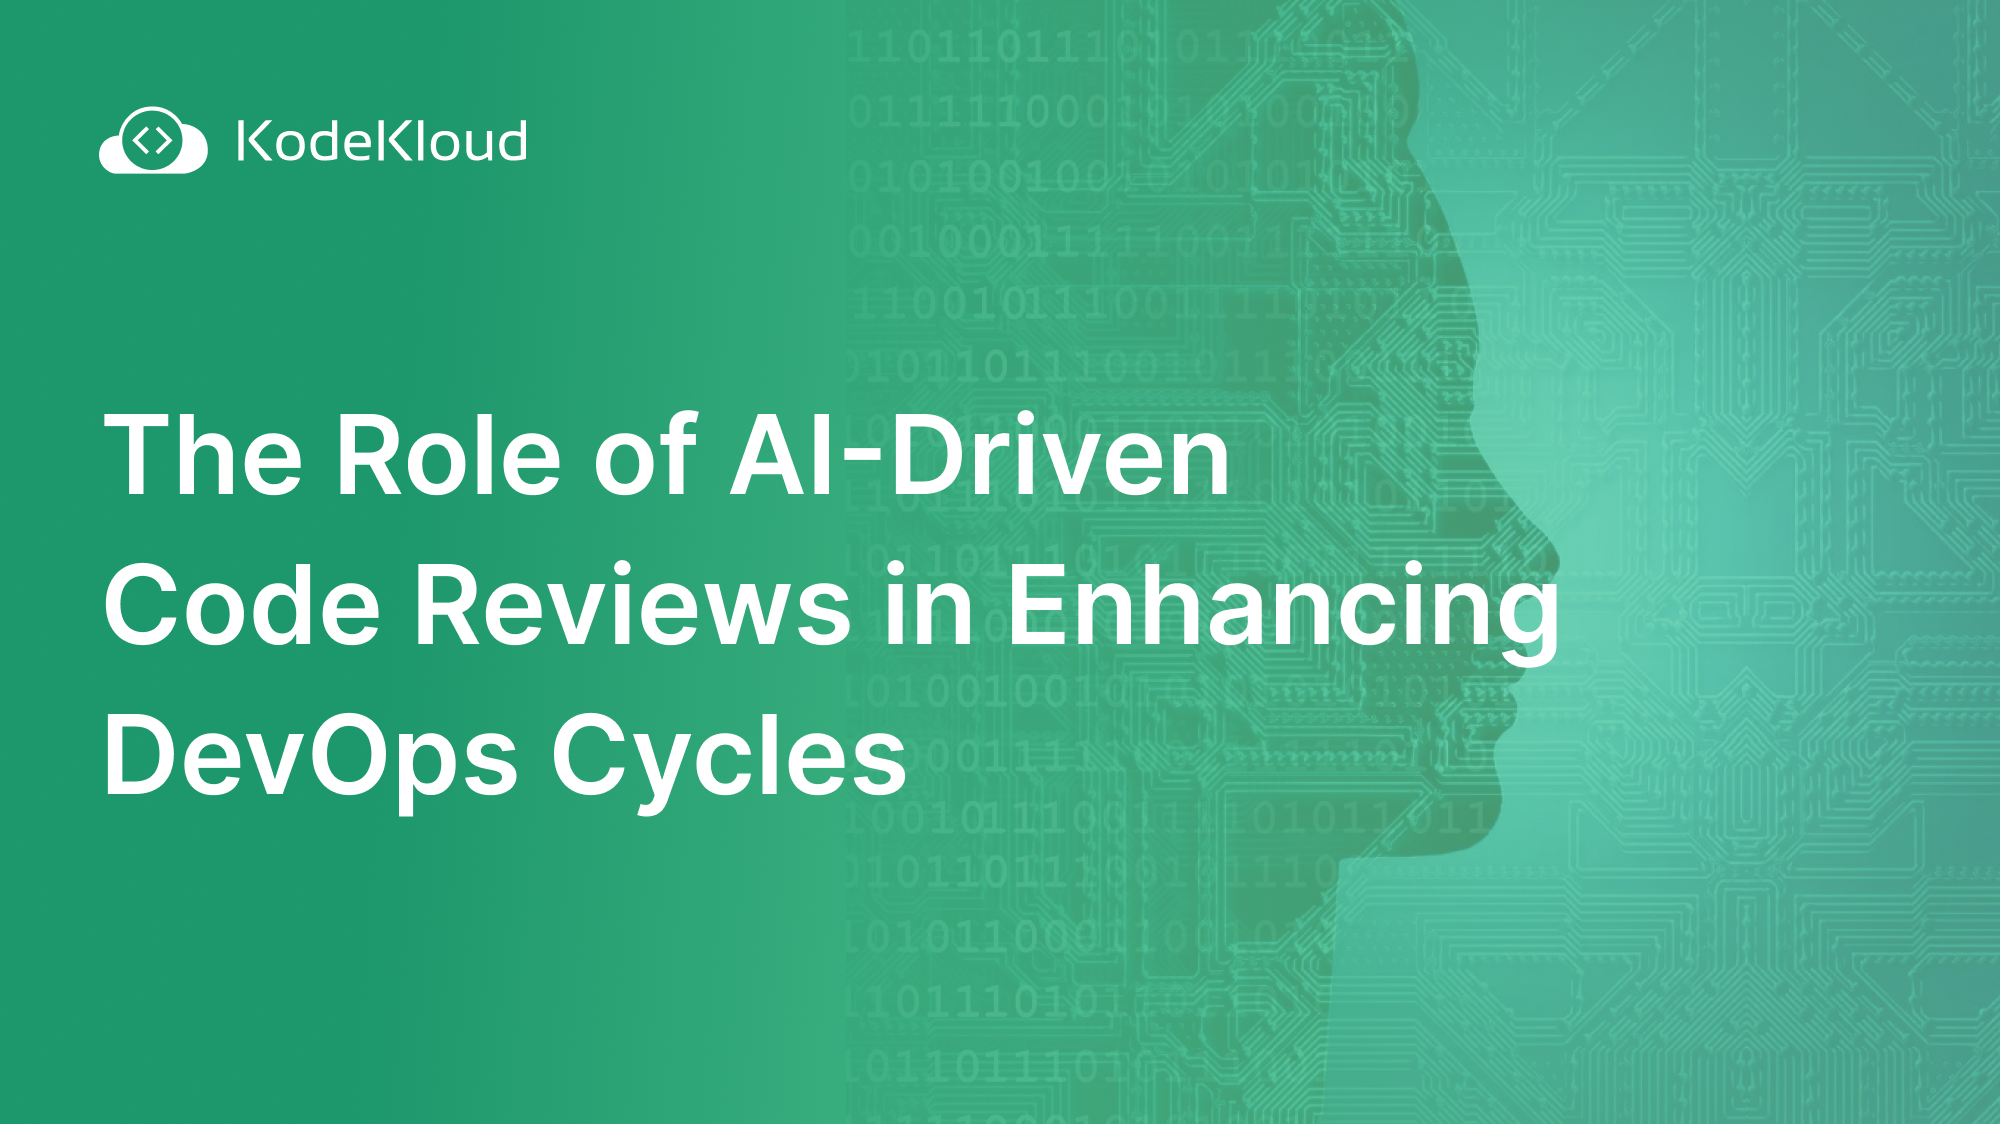 The Role of AI-Driven Code Reviews in Enhancing DevOps Cycles